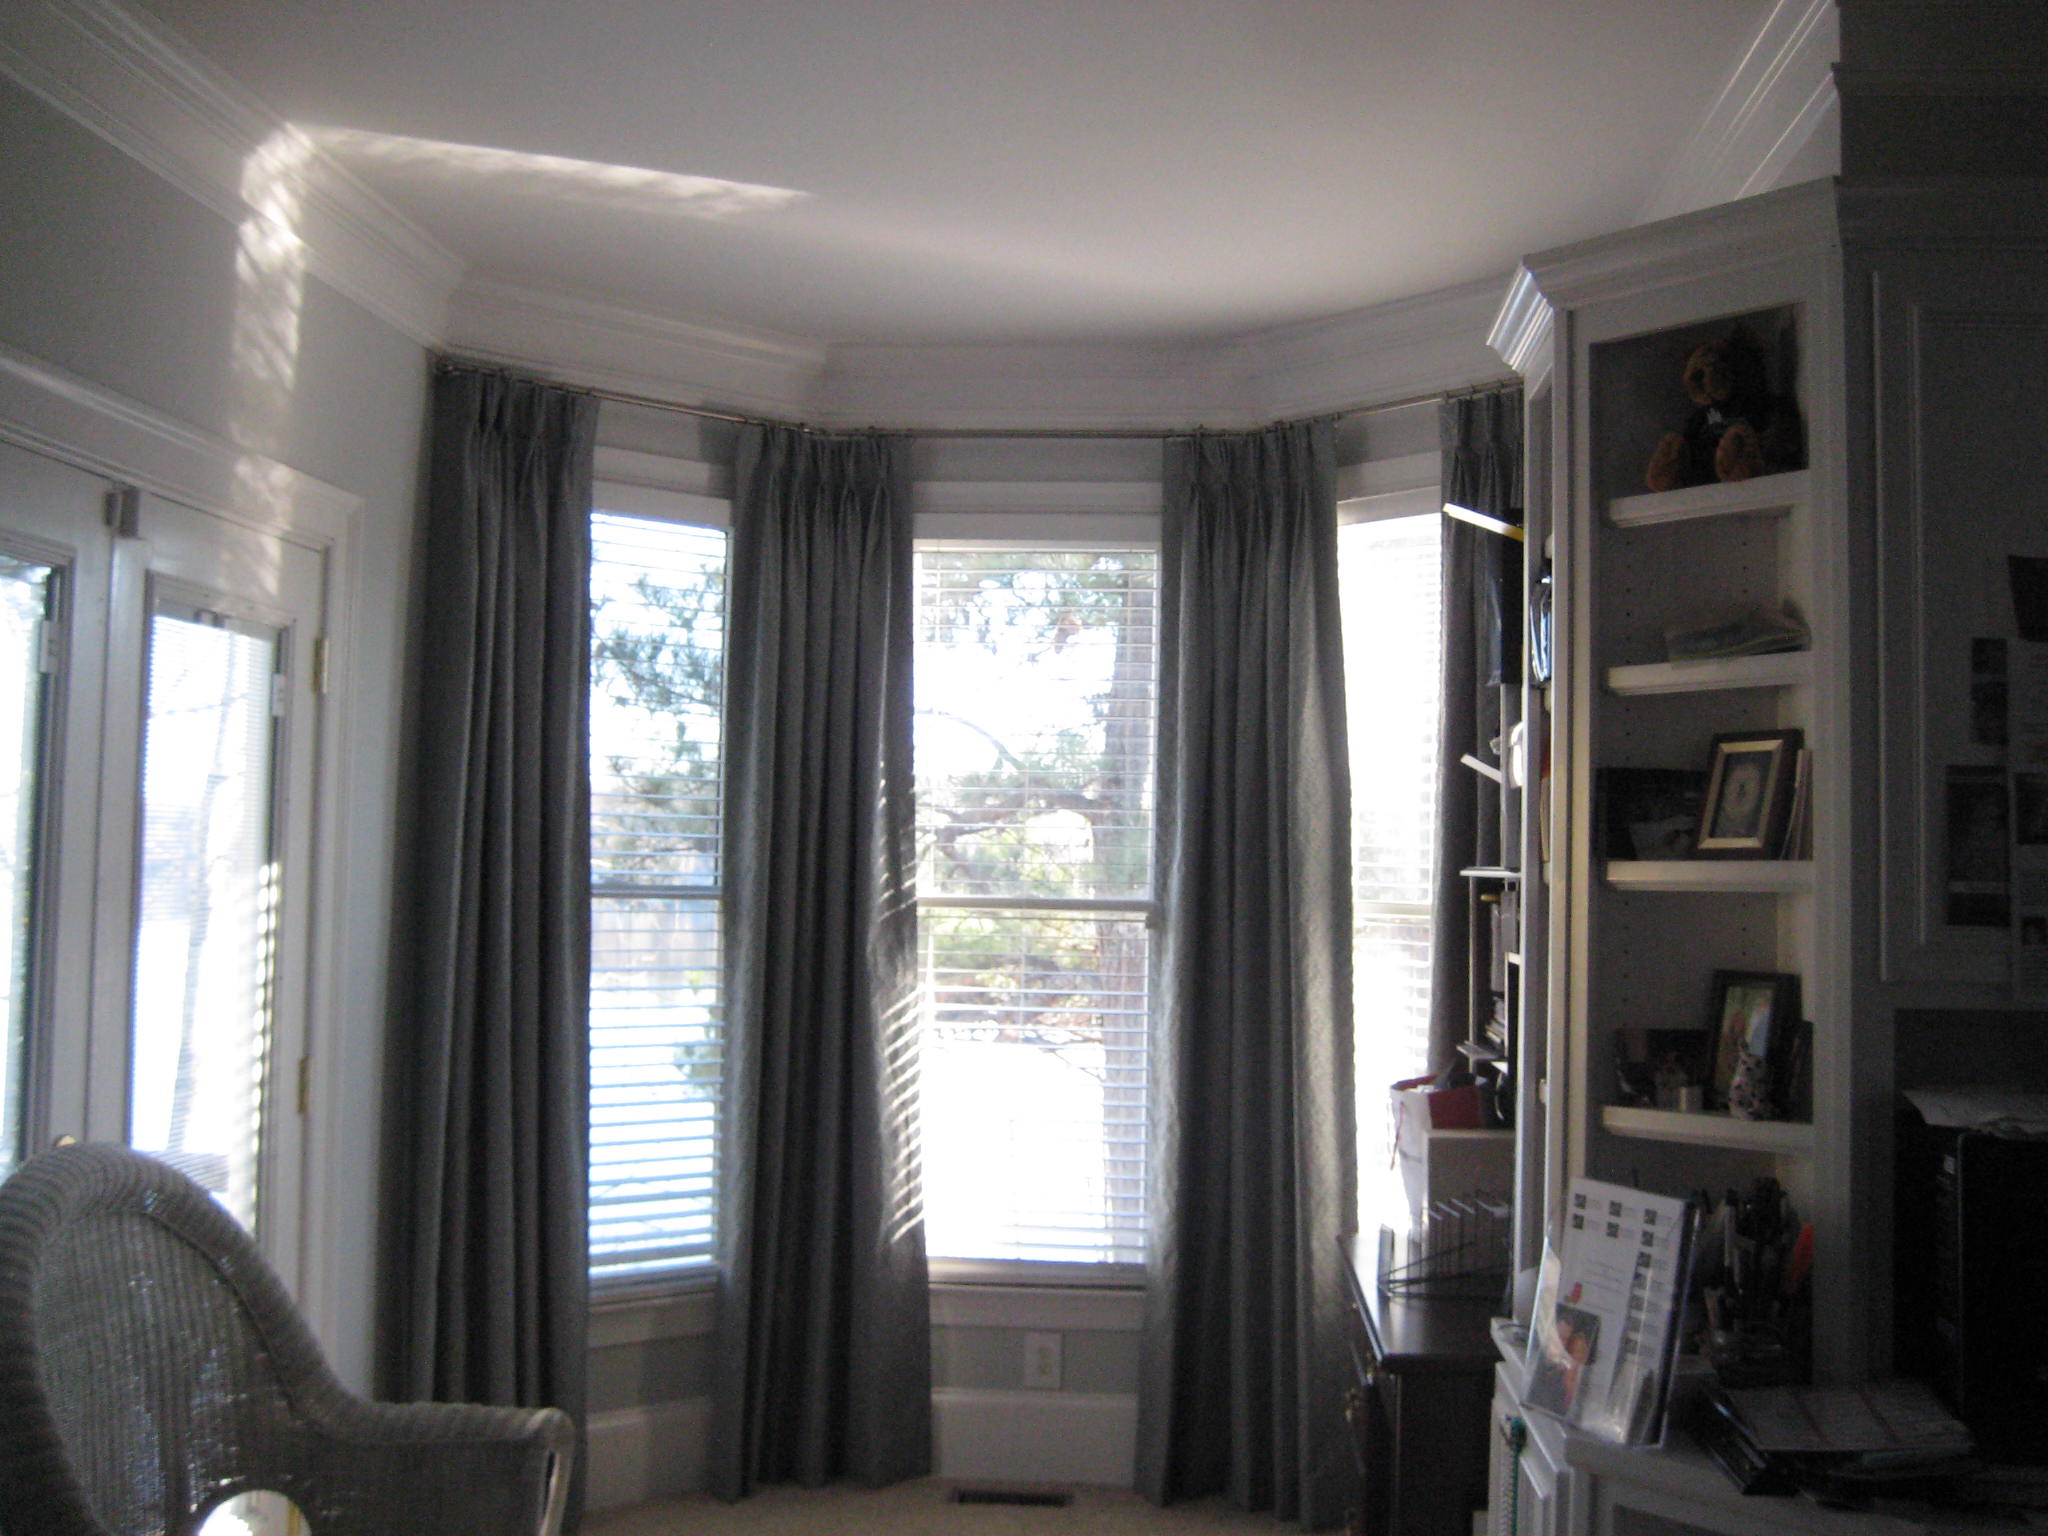 Bedroom Make over. Window treatments and blinds help insulate the home for the winter and summer.